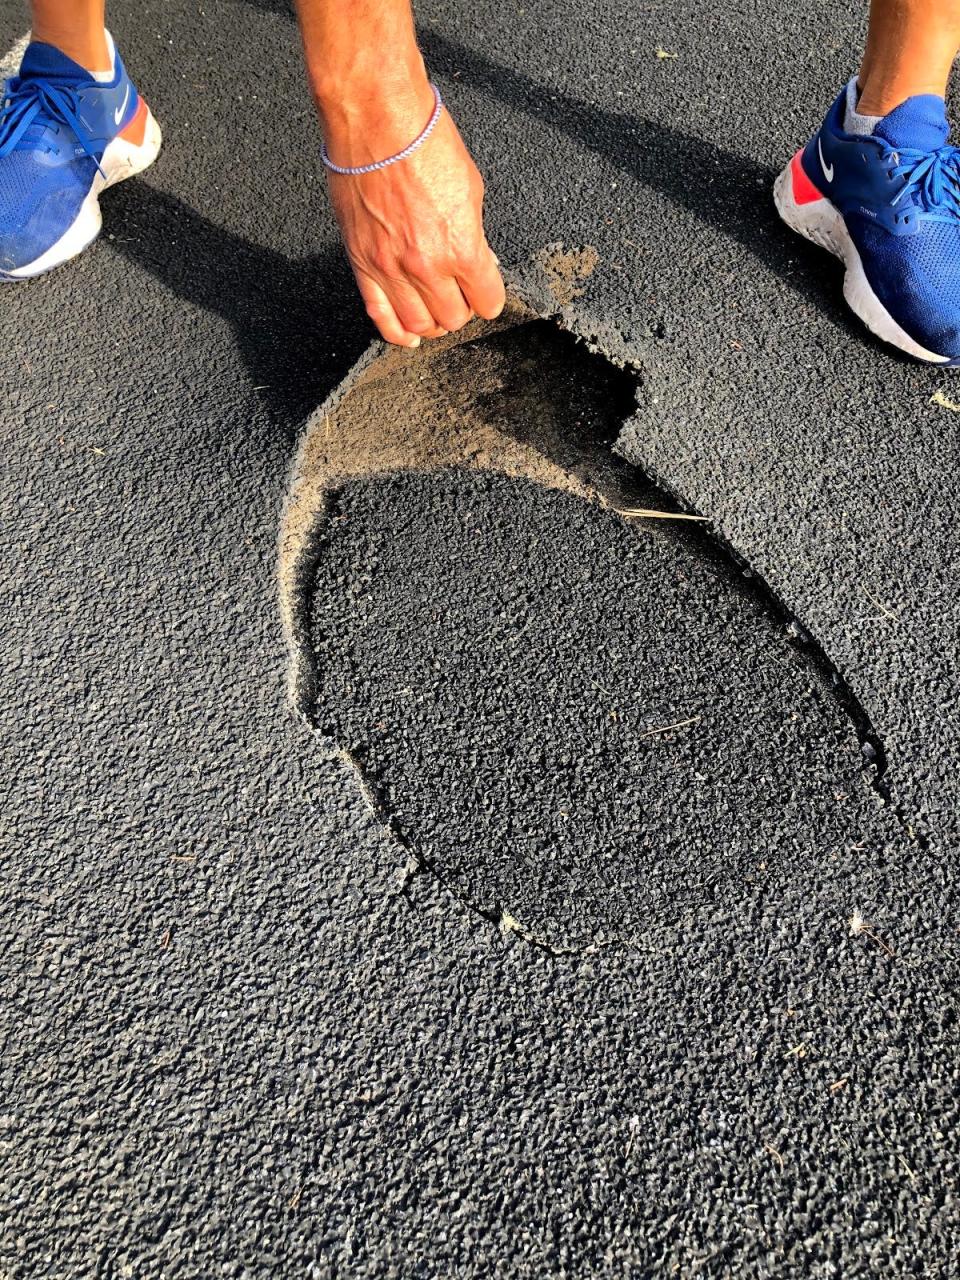 A hole in the track at Kennebunk High School is but one example of why RSU 21 is moving to renovate the KHS athletic complex.